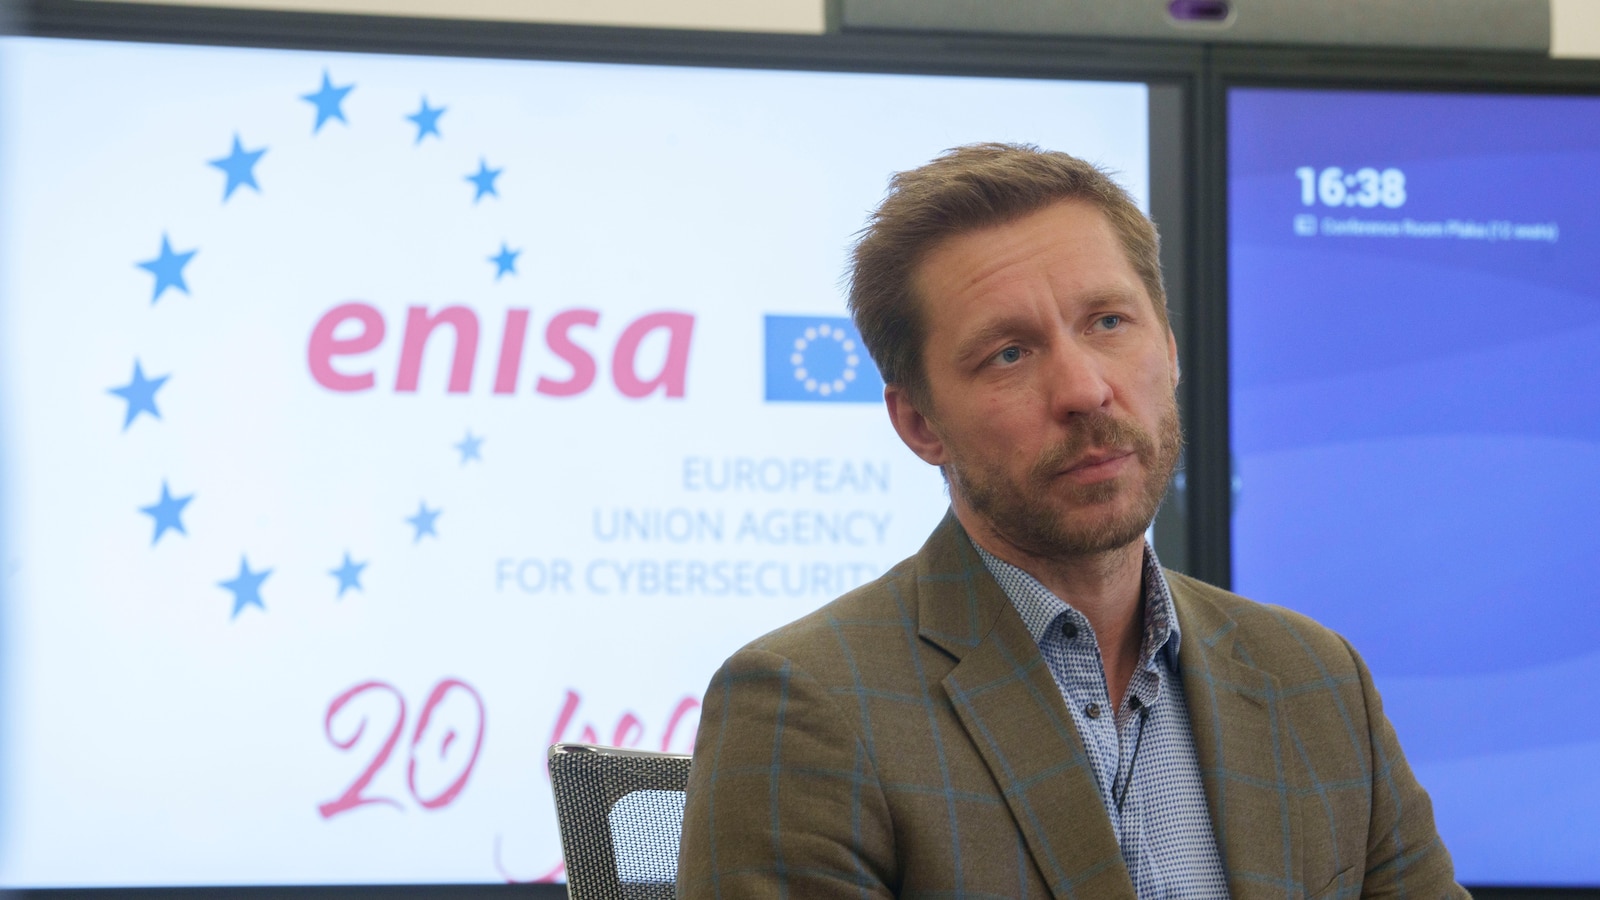 Europe's cybersecurity chief says the number of disruptive attacks has doubled recently and sees Russia behind many